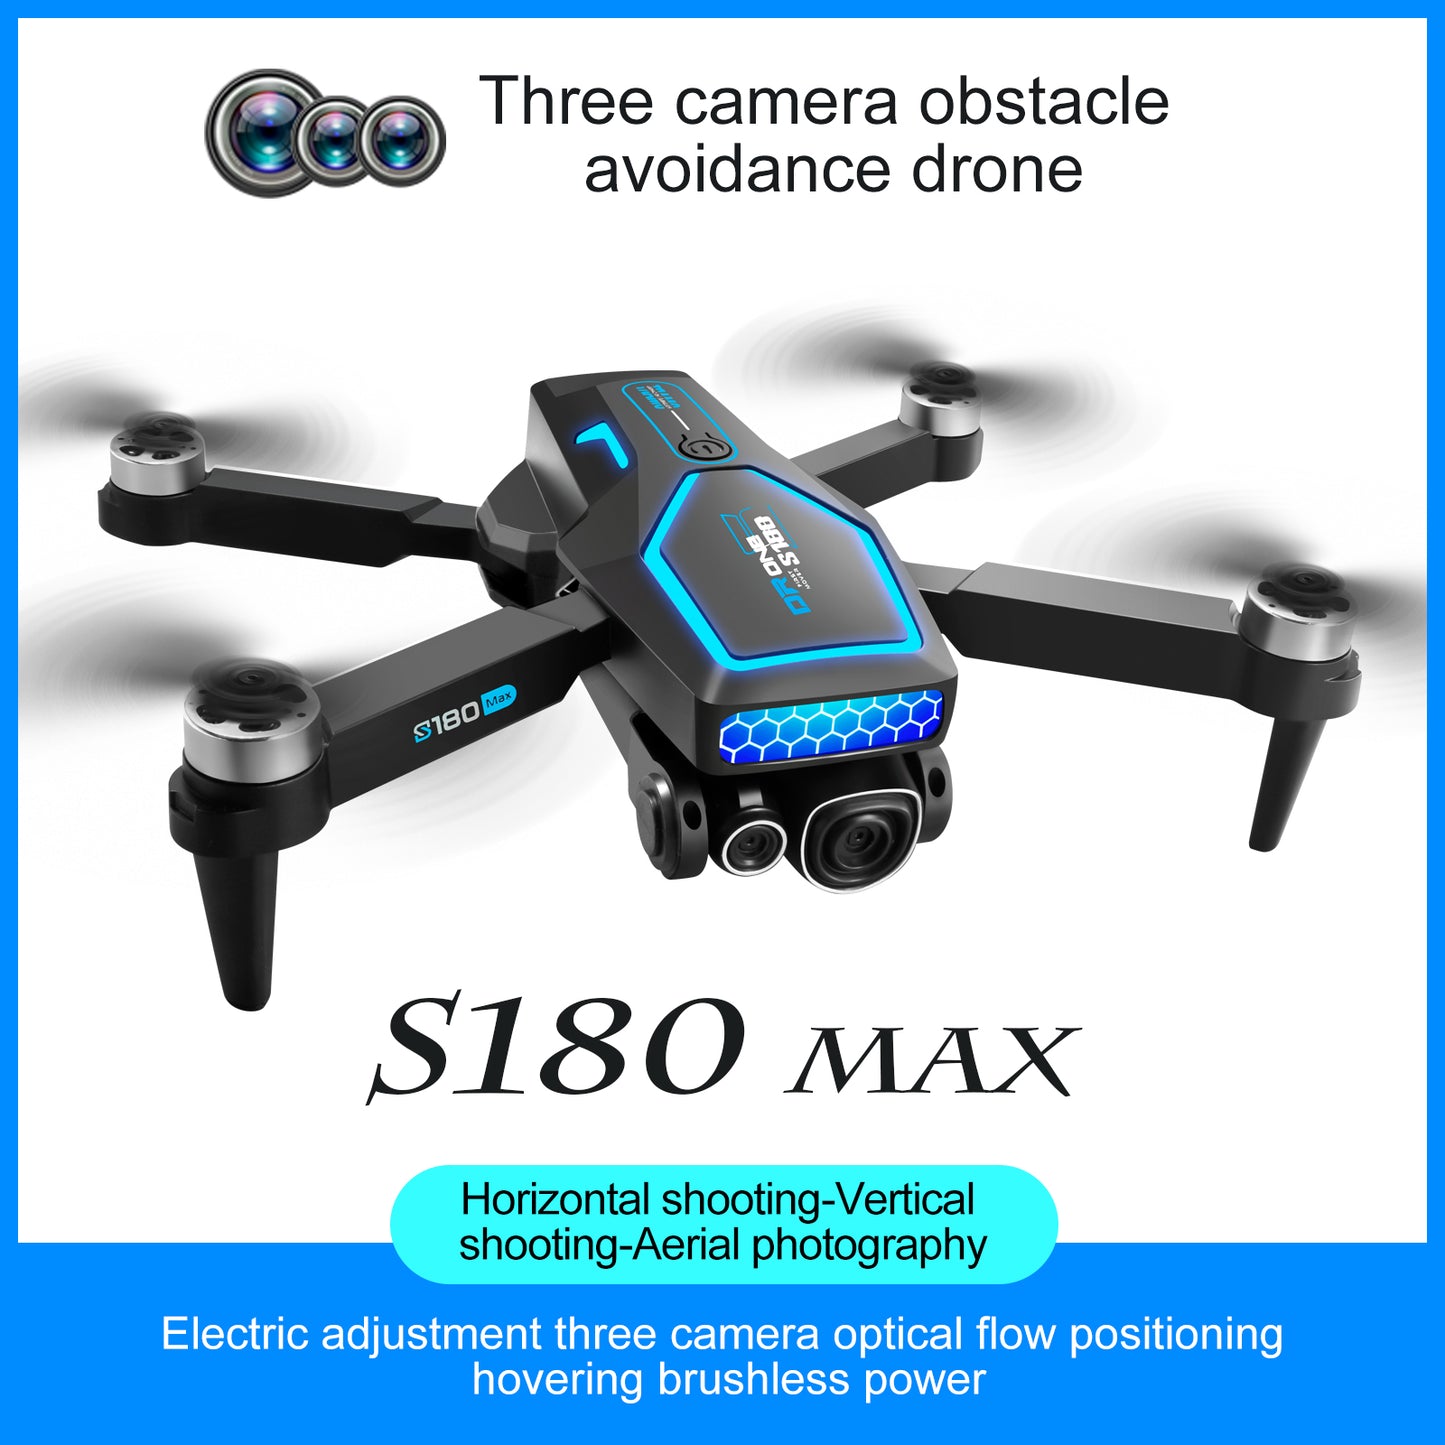 S180 Drone: Advanced aerial photography and hovering capabilities with adjustable cameras.